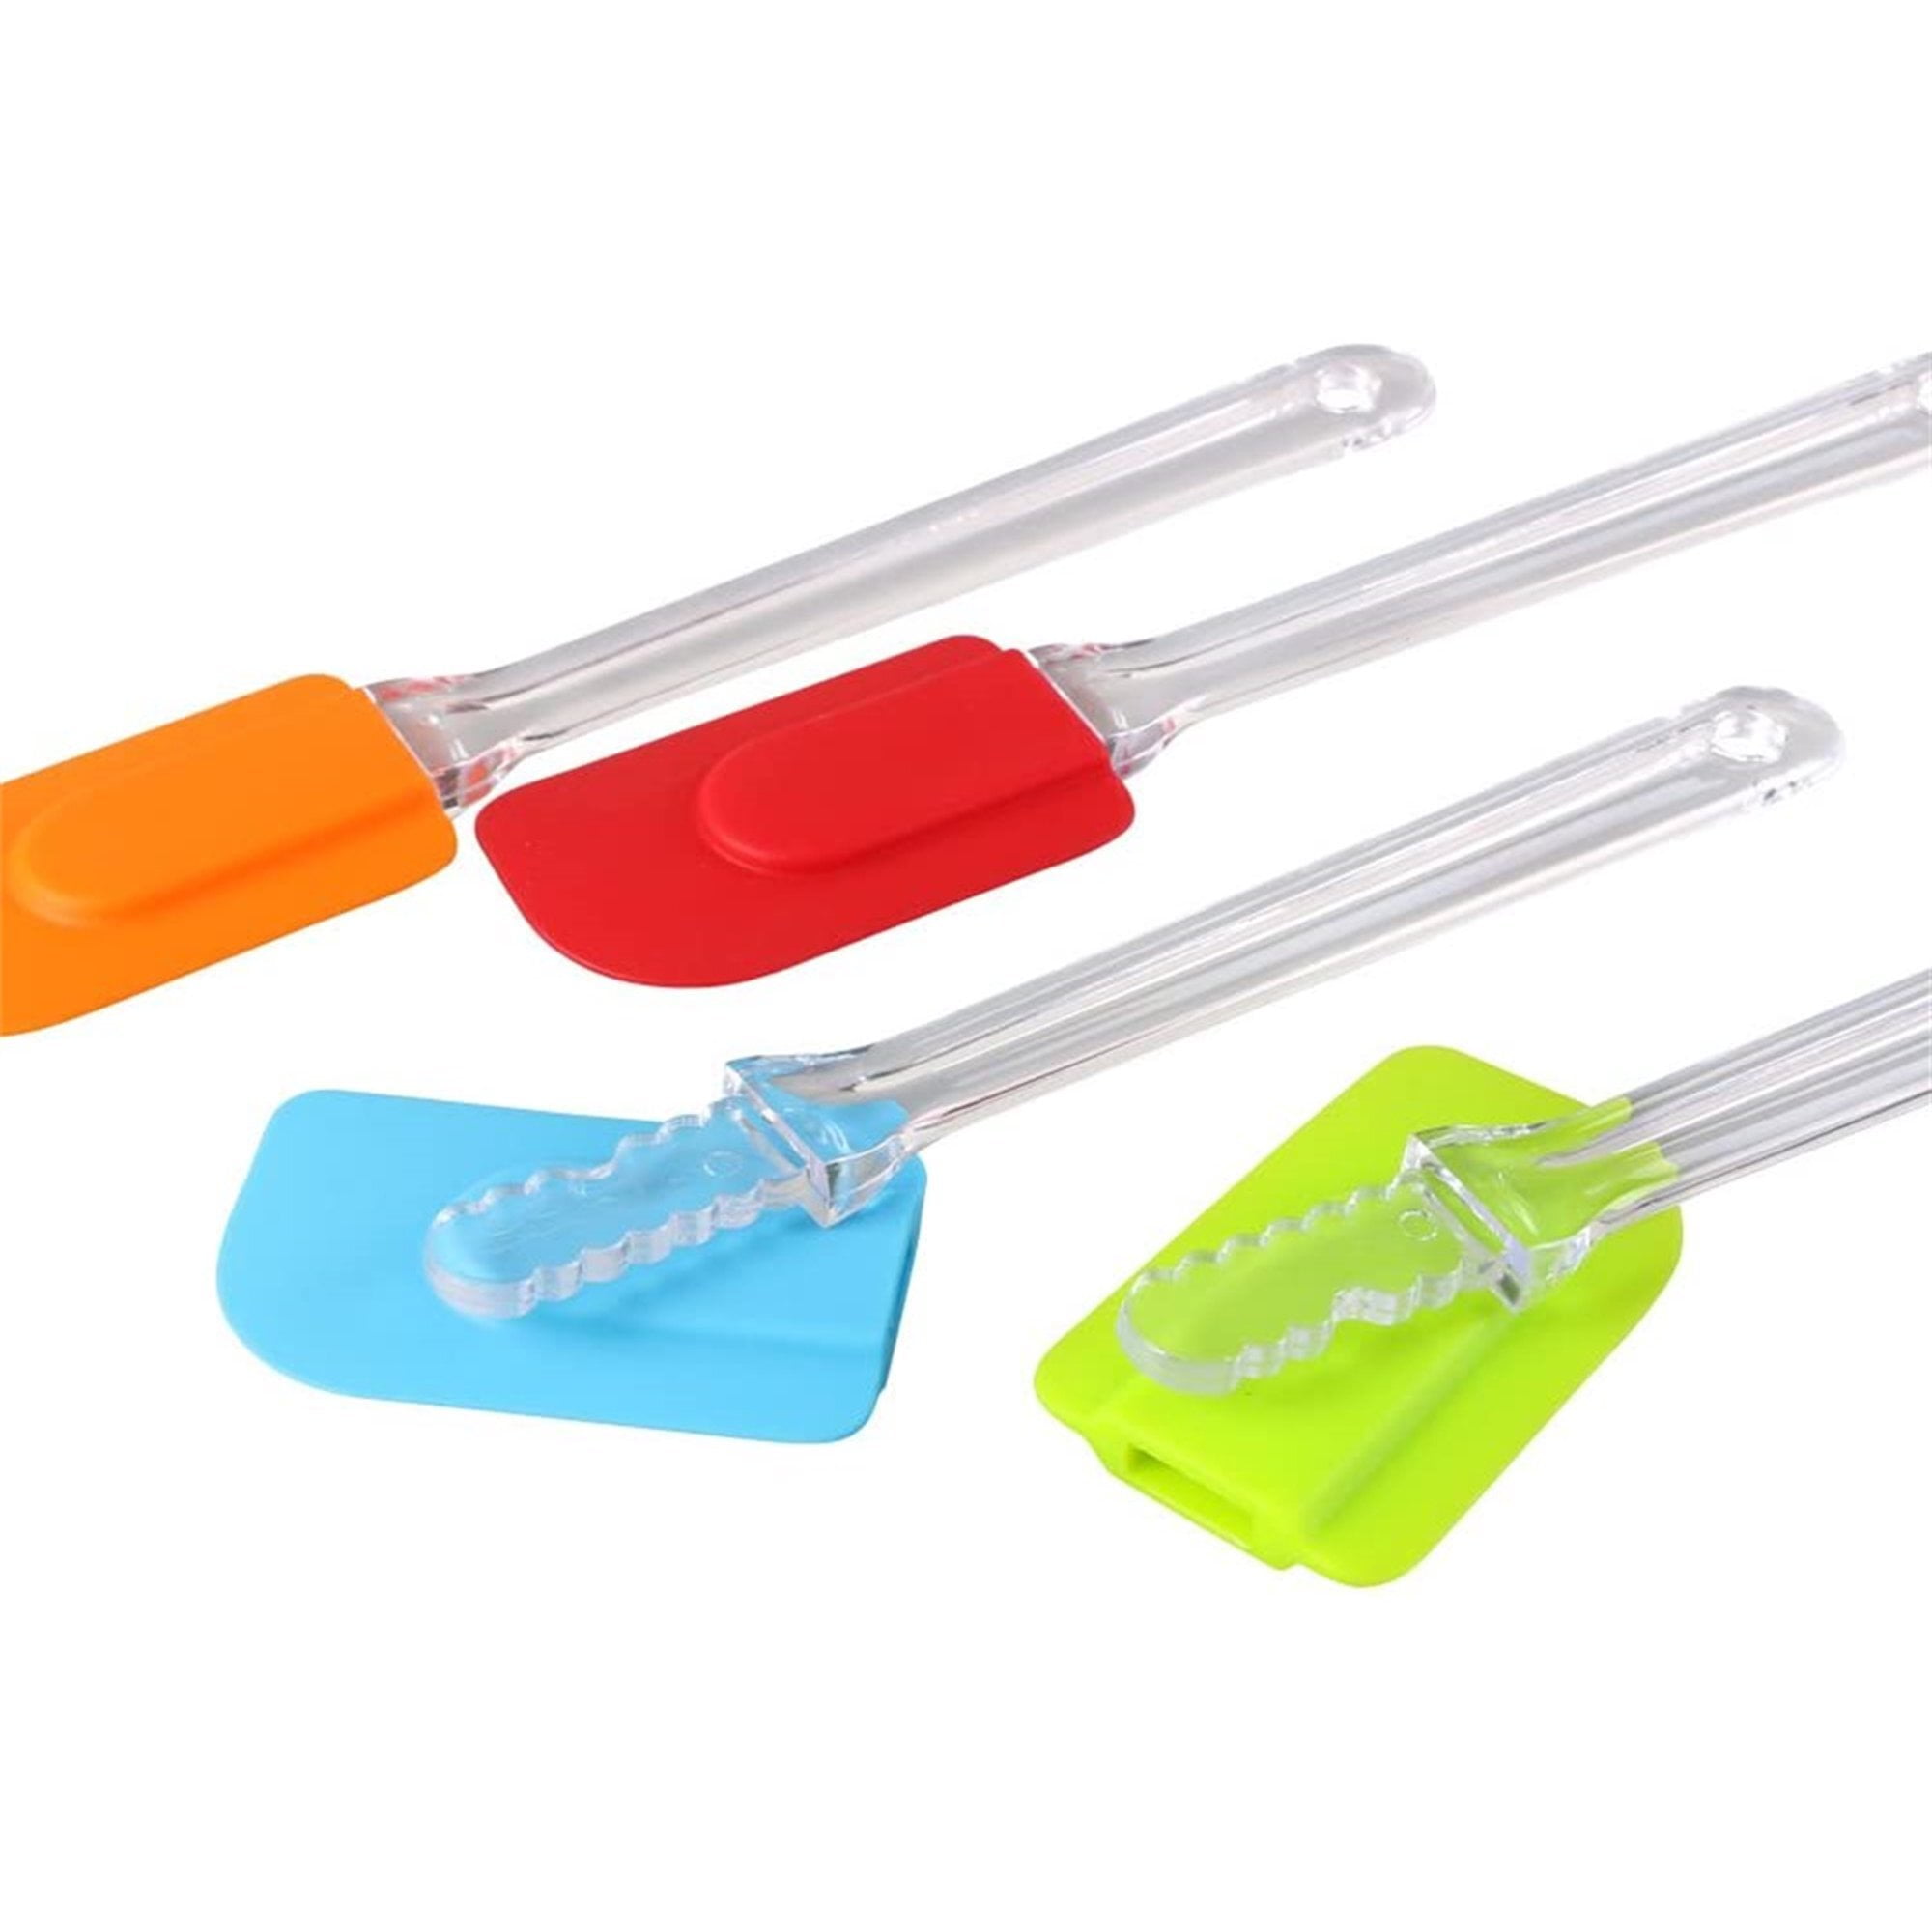 Hotec hotec food grade silicone rubber spatula set for baking, cooking, and  mixing high heat resistant non stick dishwasher safe bp